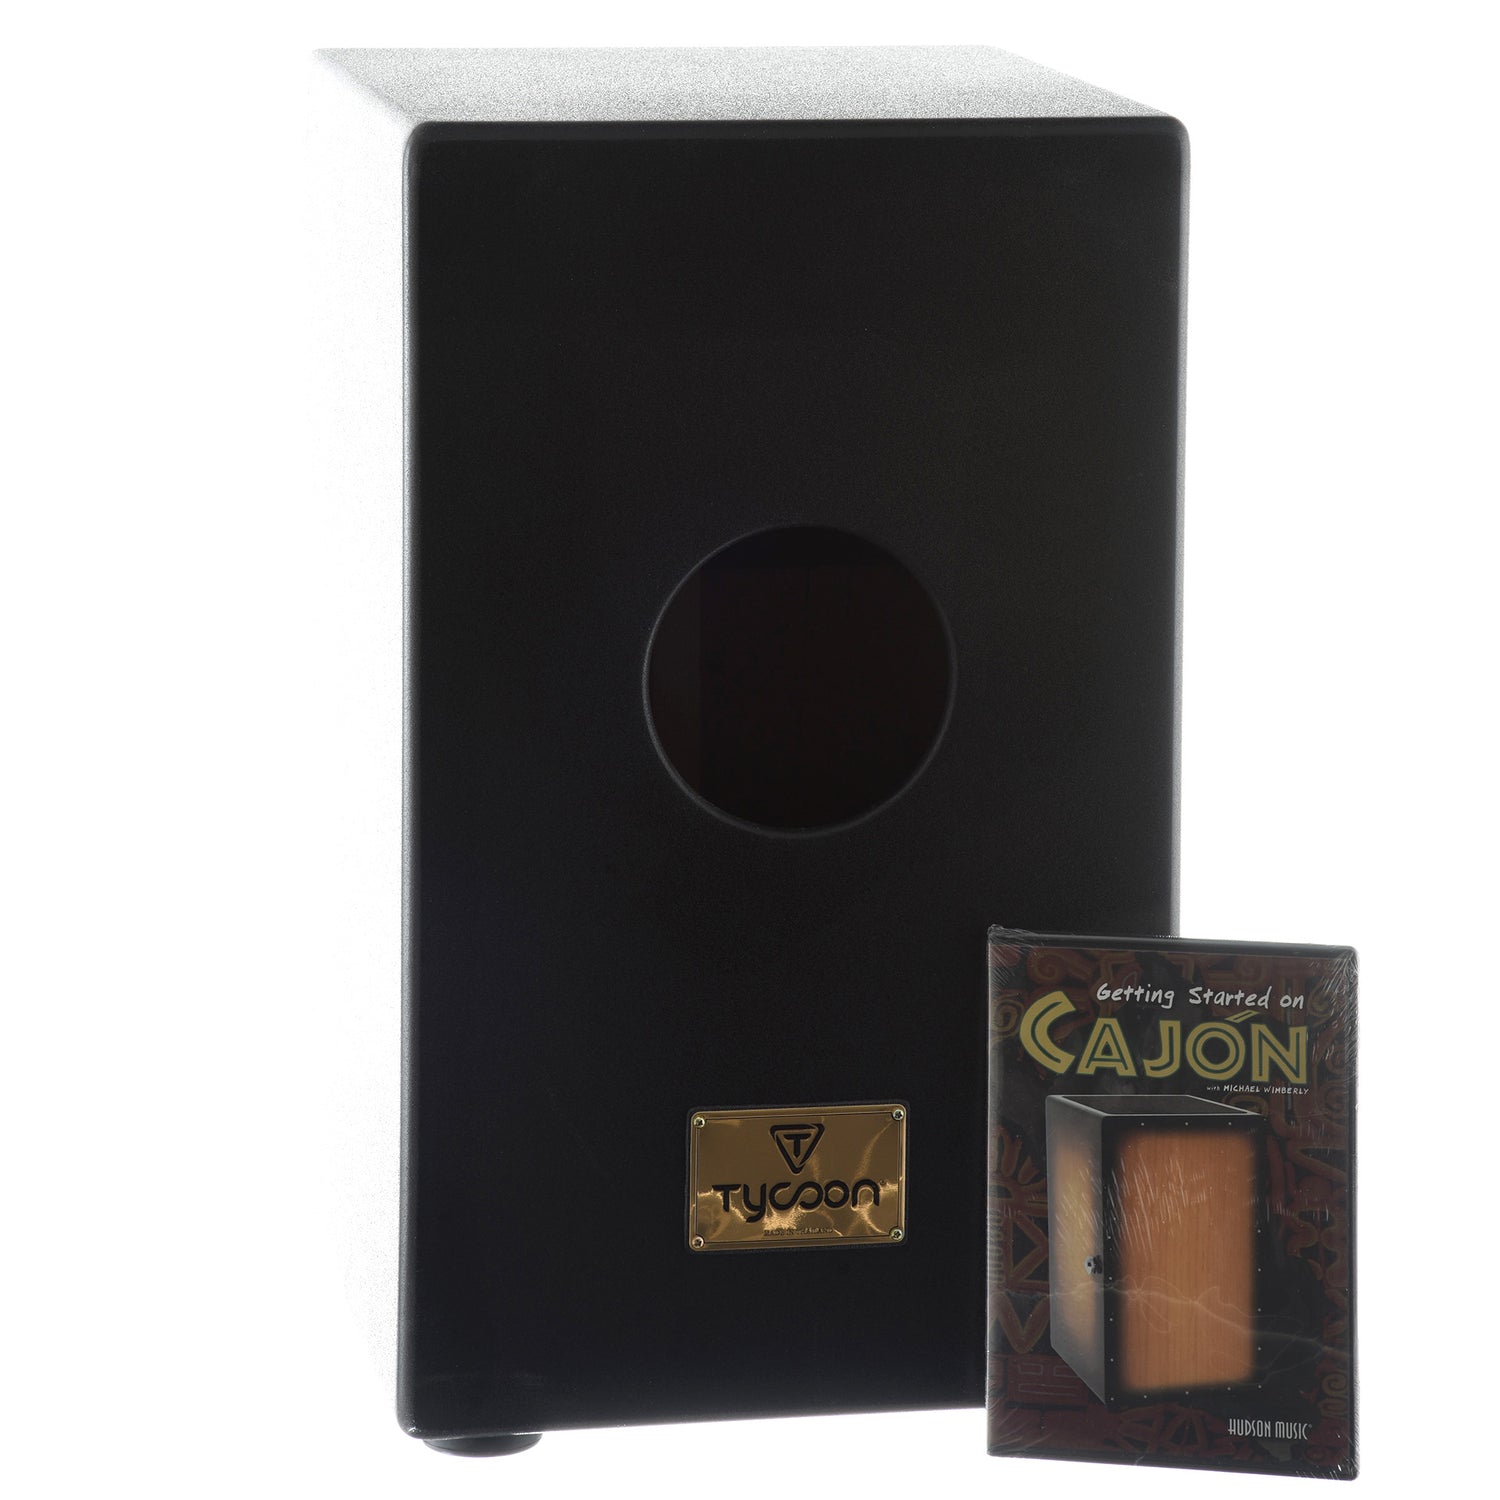 Image 5 of Cajon Starter Pack - SKU# CAJPACK : Product Type Percussion Instruments : Elderly Instruments